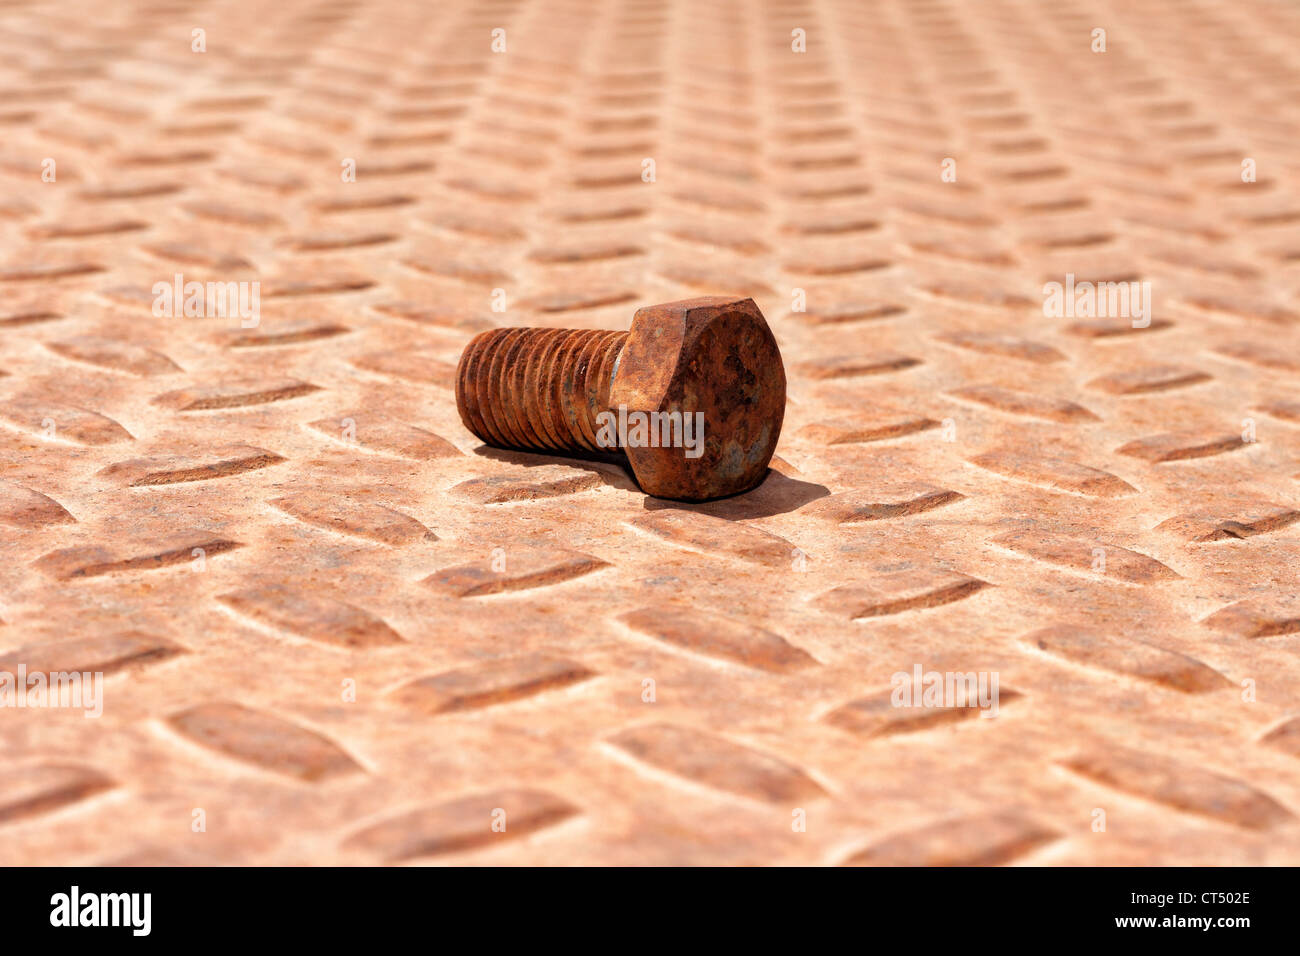 abstract, attach, background, bolt, component, diminishing, fasten, grate, grid, grunge, grungy, hardware, hexagonal, iron, loos Stock Photo